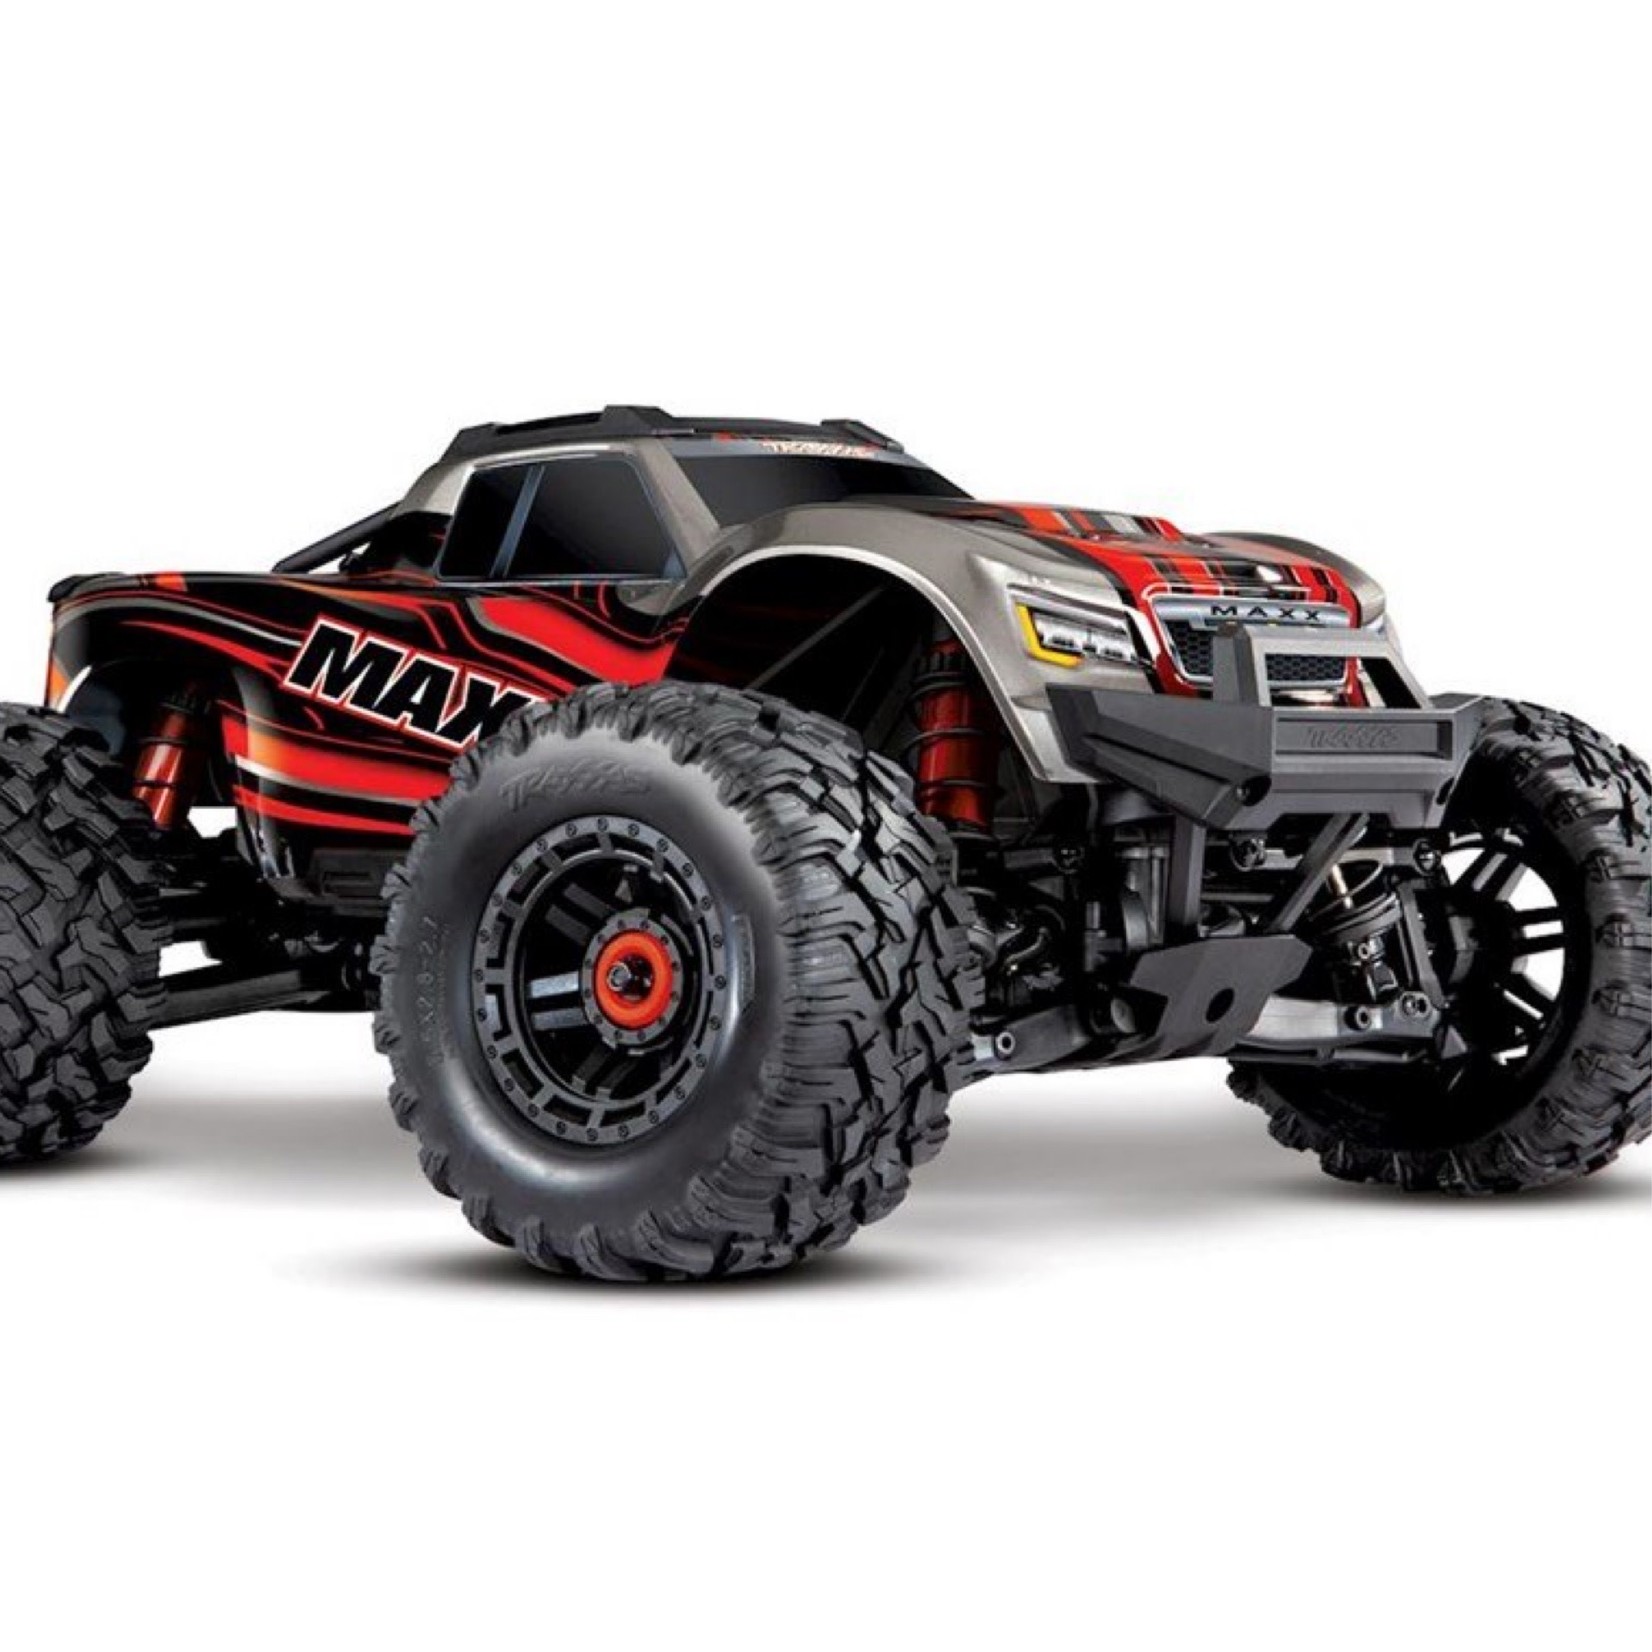 Traxxas Traxxas Maxx 1/10 Brushless RTR 4WD Monster Truck (RED) w/TQi 2.4GHz Radio & TSM  #89076-4-RED